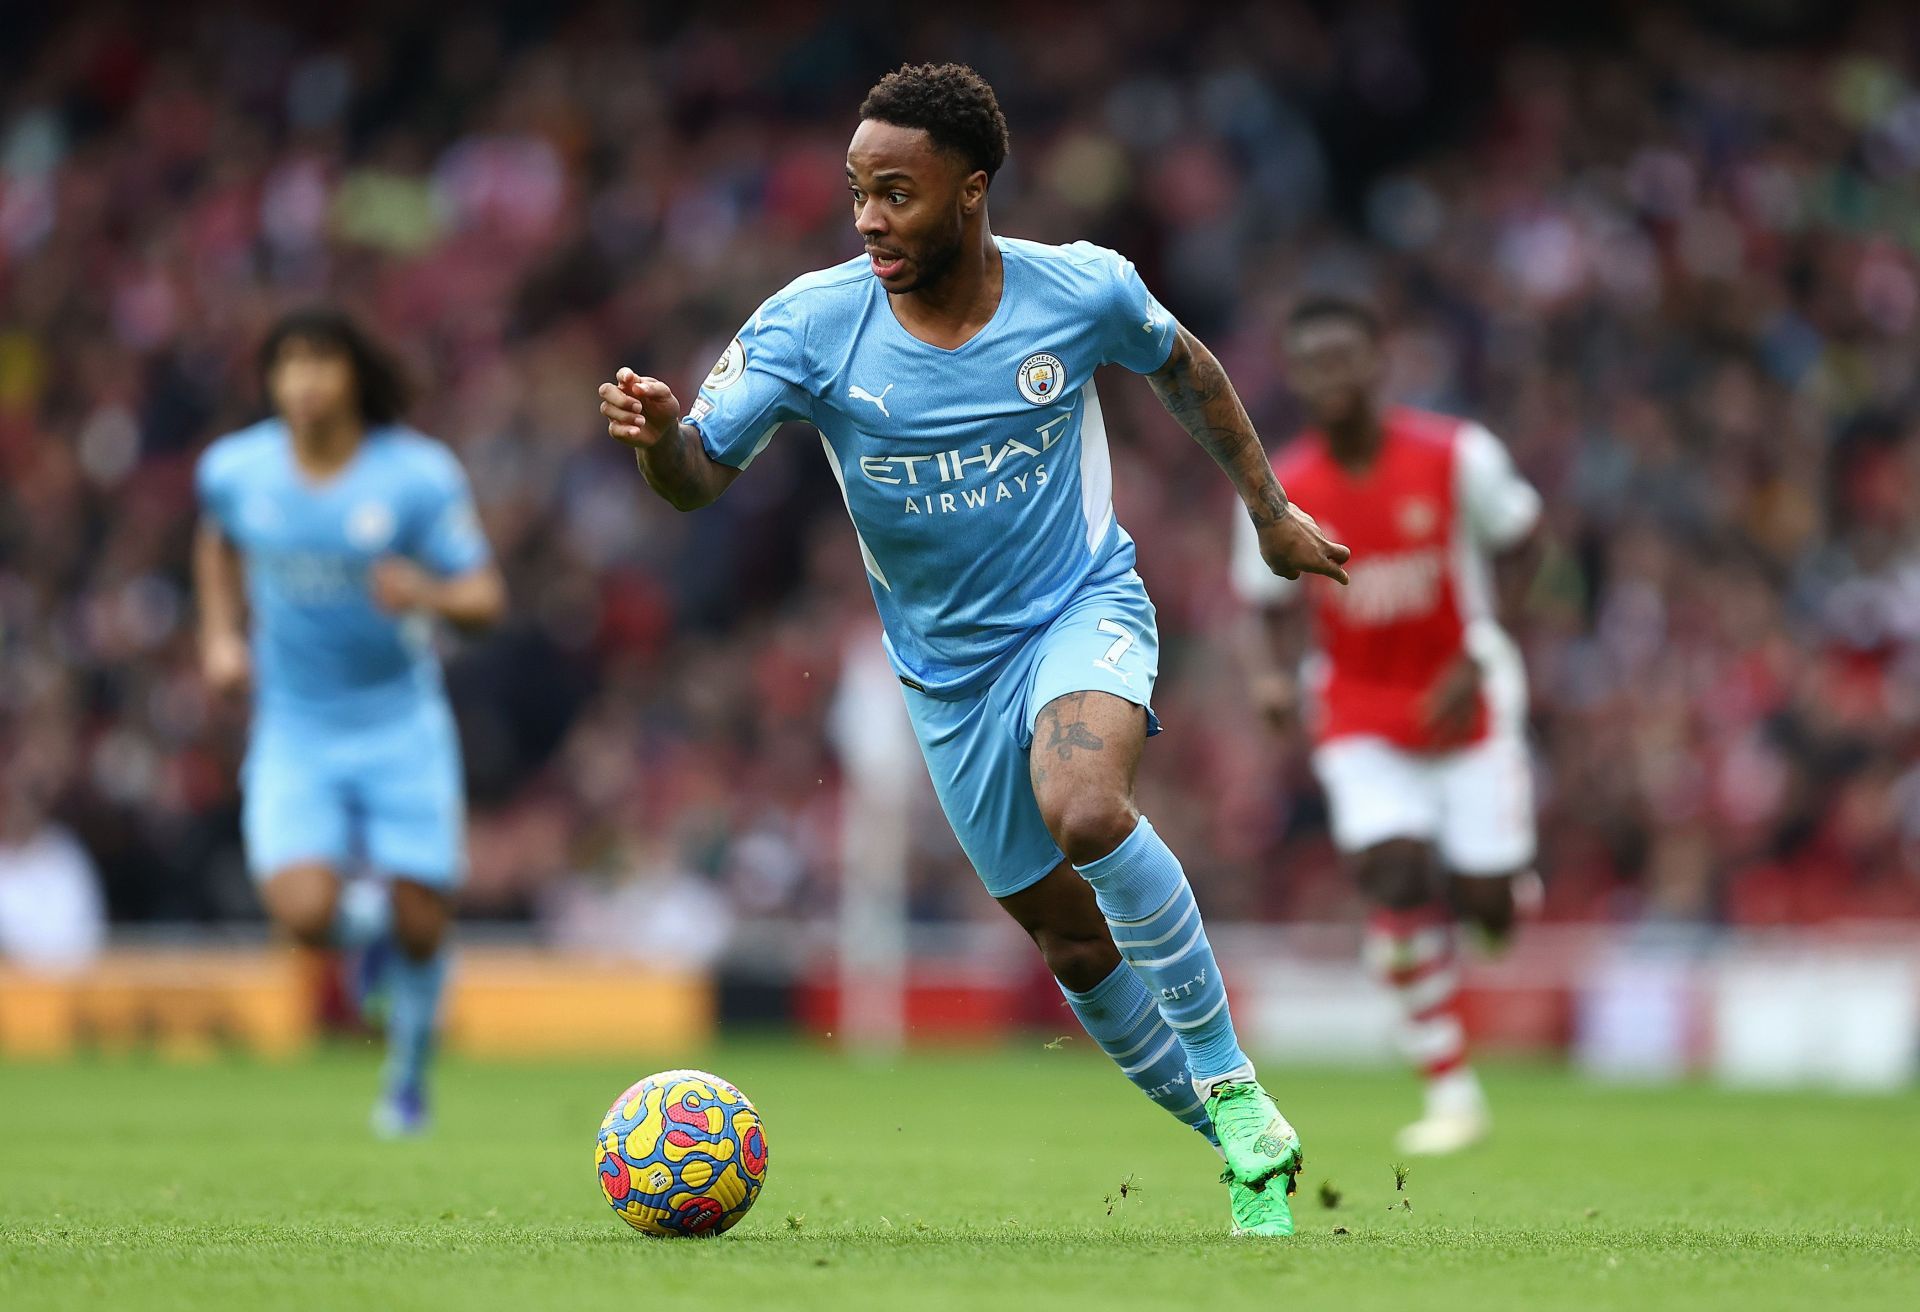 Real Madrid are keeping a close eye on Raheem Sterling.